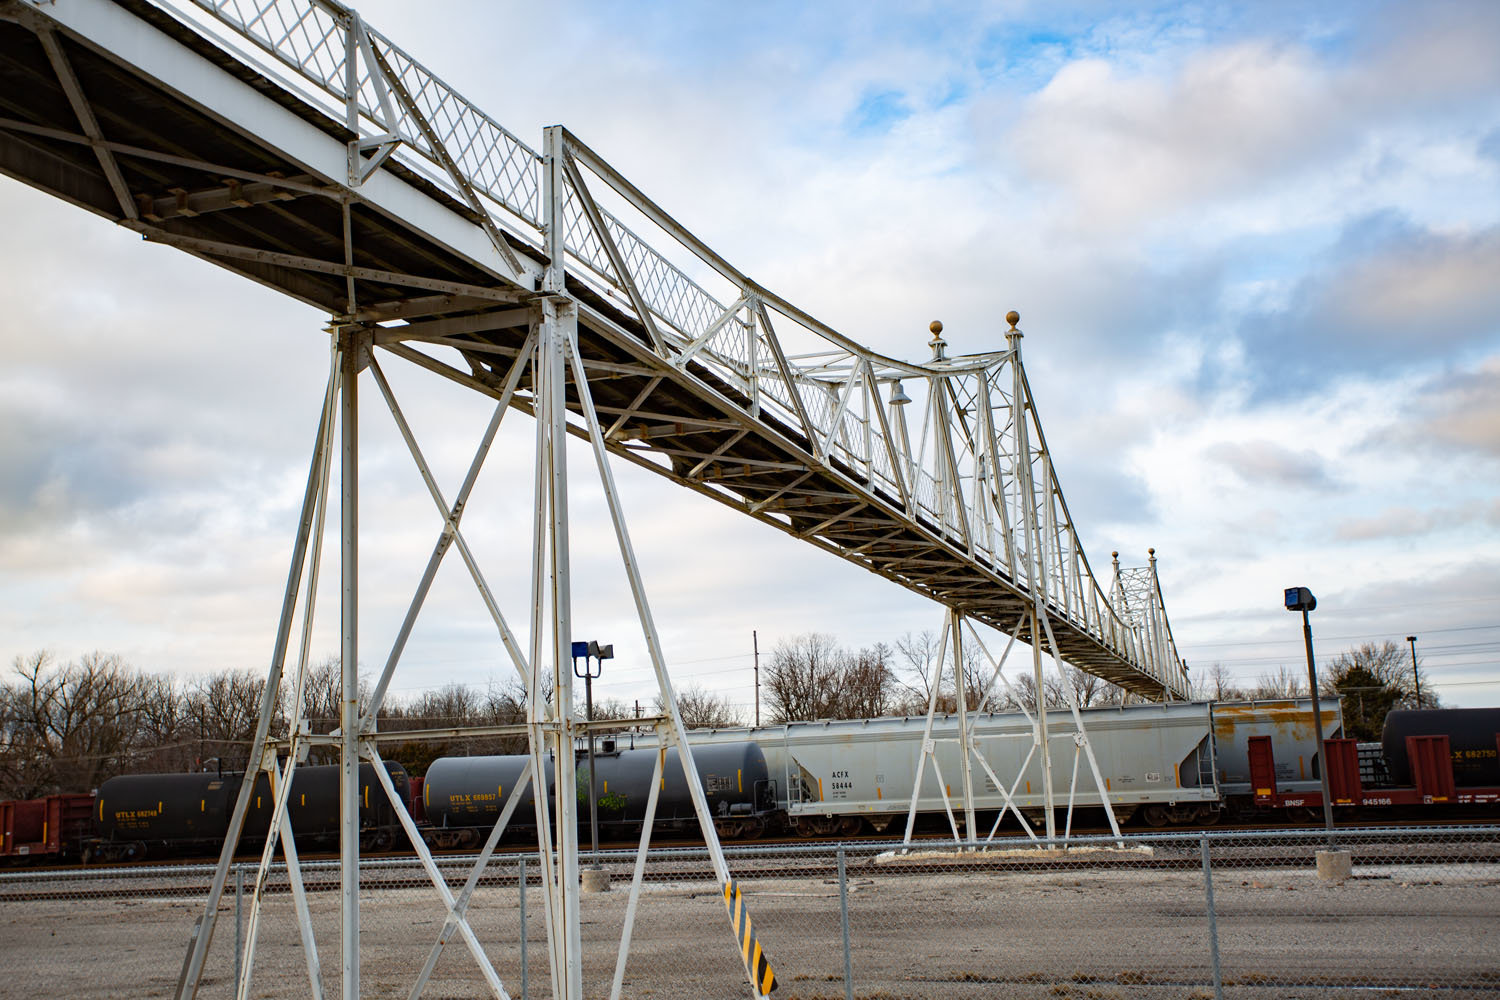 The Jefferson Avenue Footbridge rehabilitation project is slated for an open-bid process this spring.